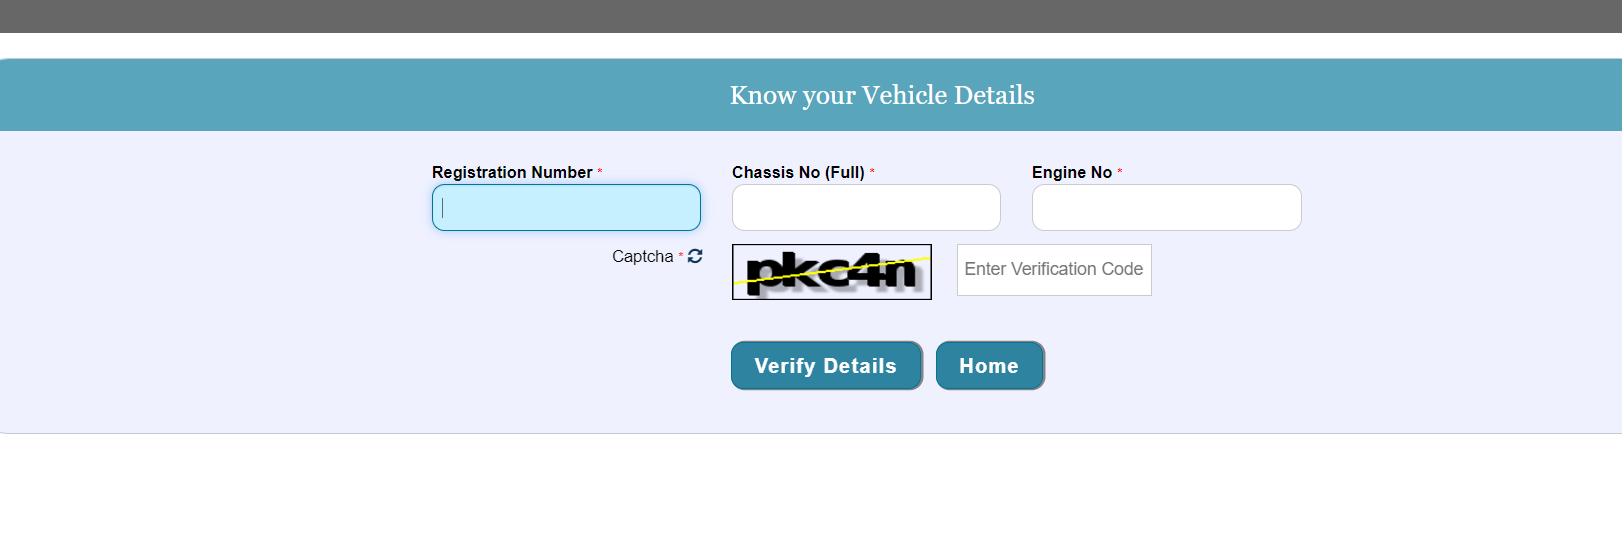 Know Vehicle Details